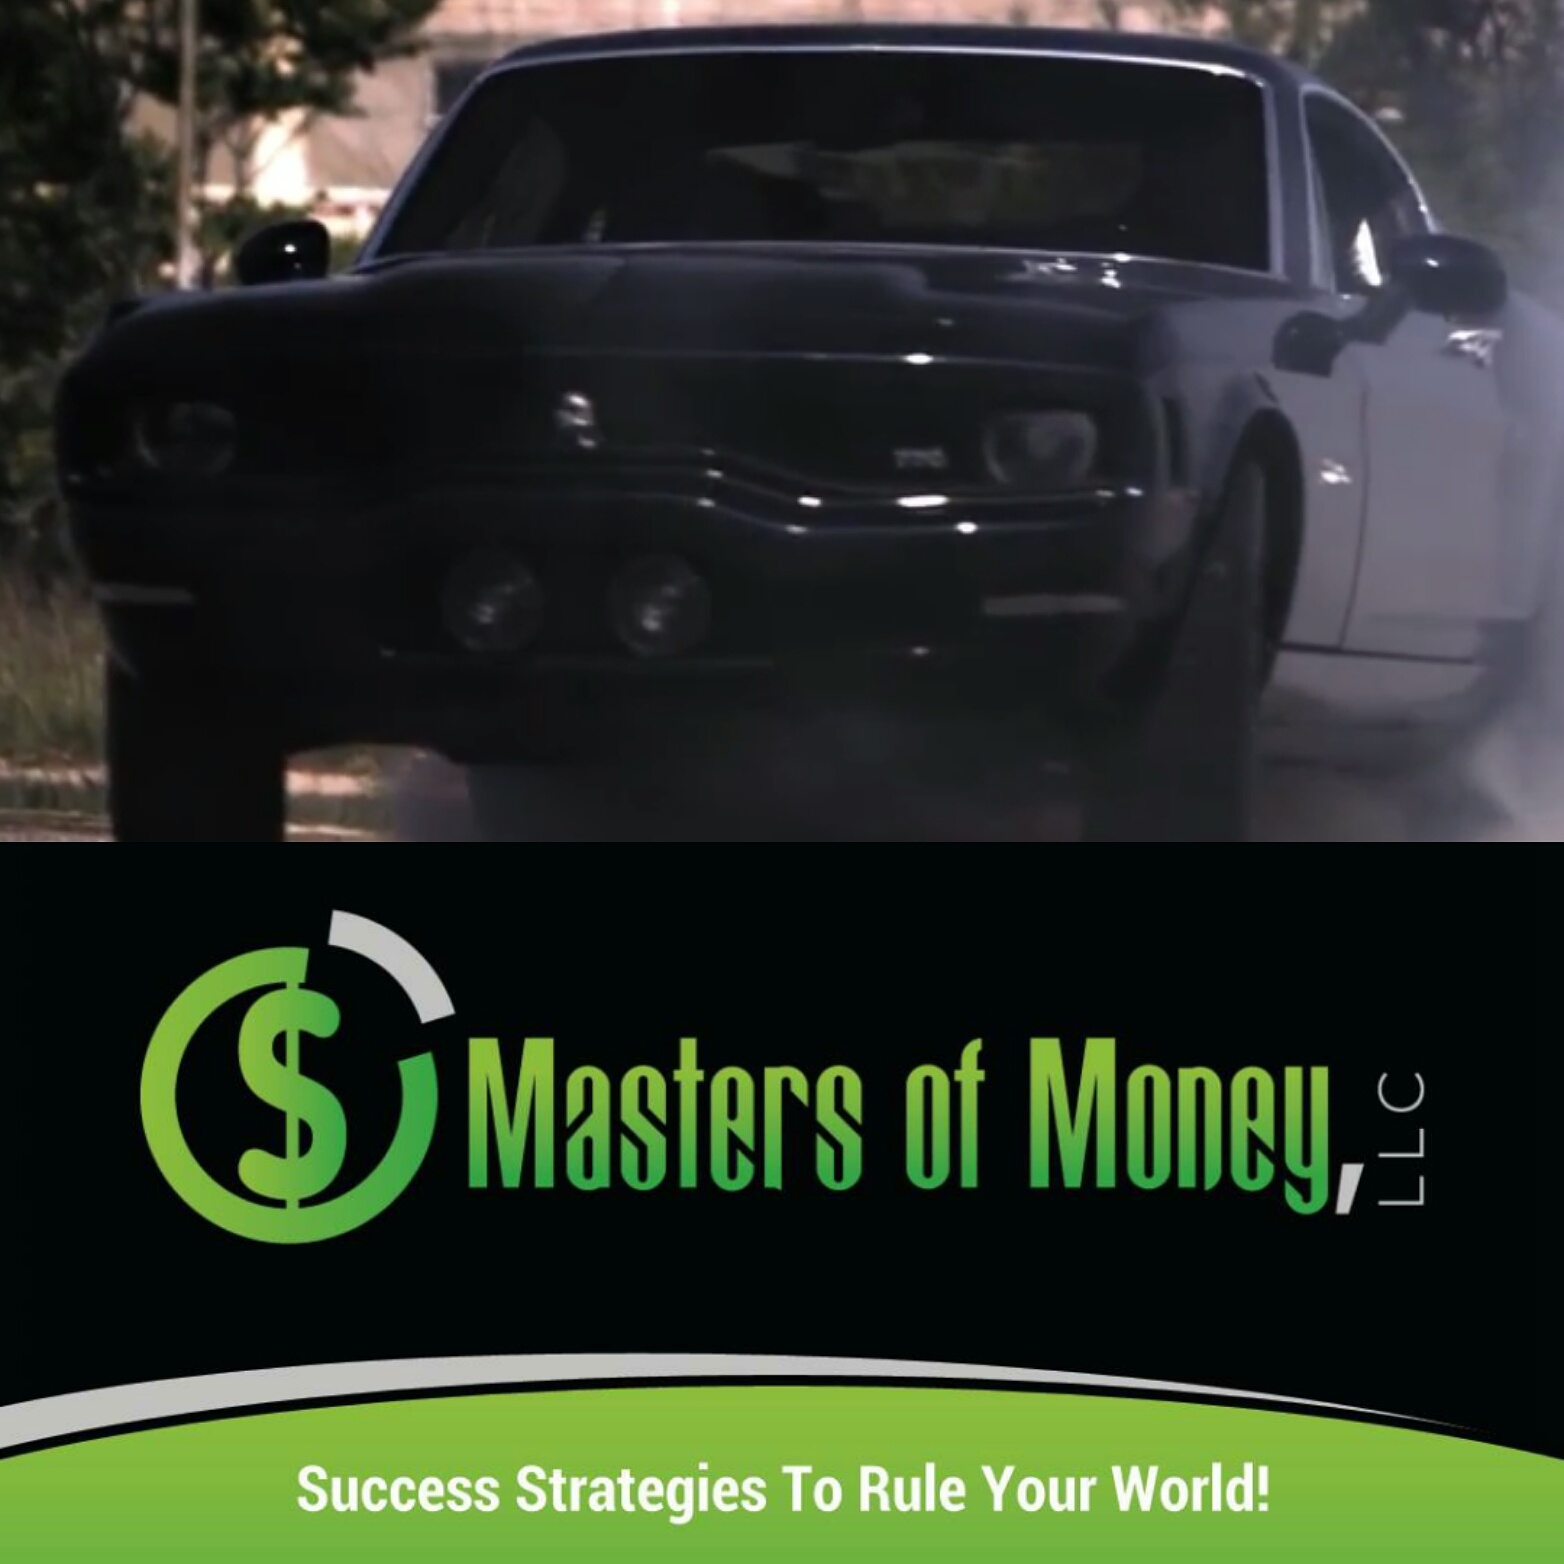 Check us out on facebook at www.facebook.com/mastersofmoney1